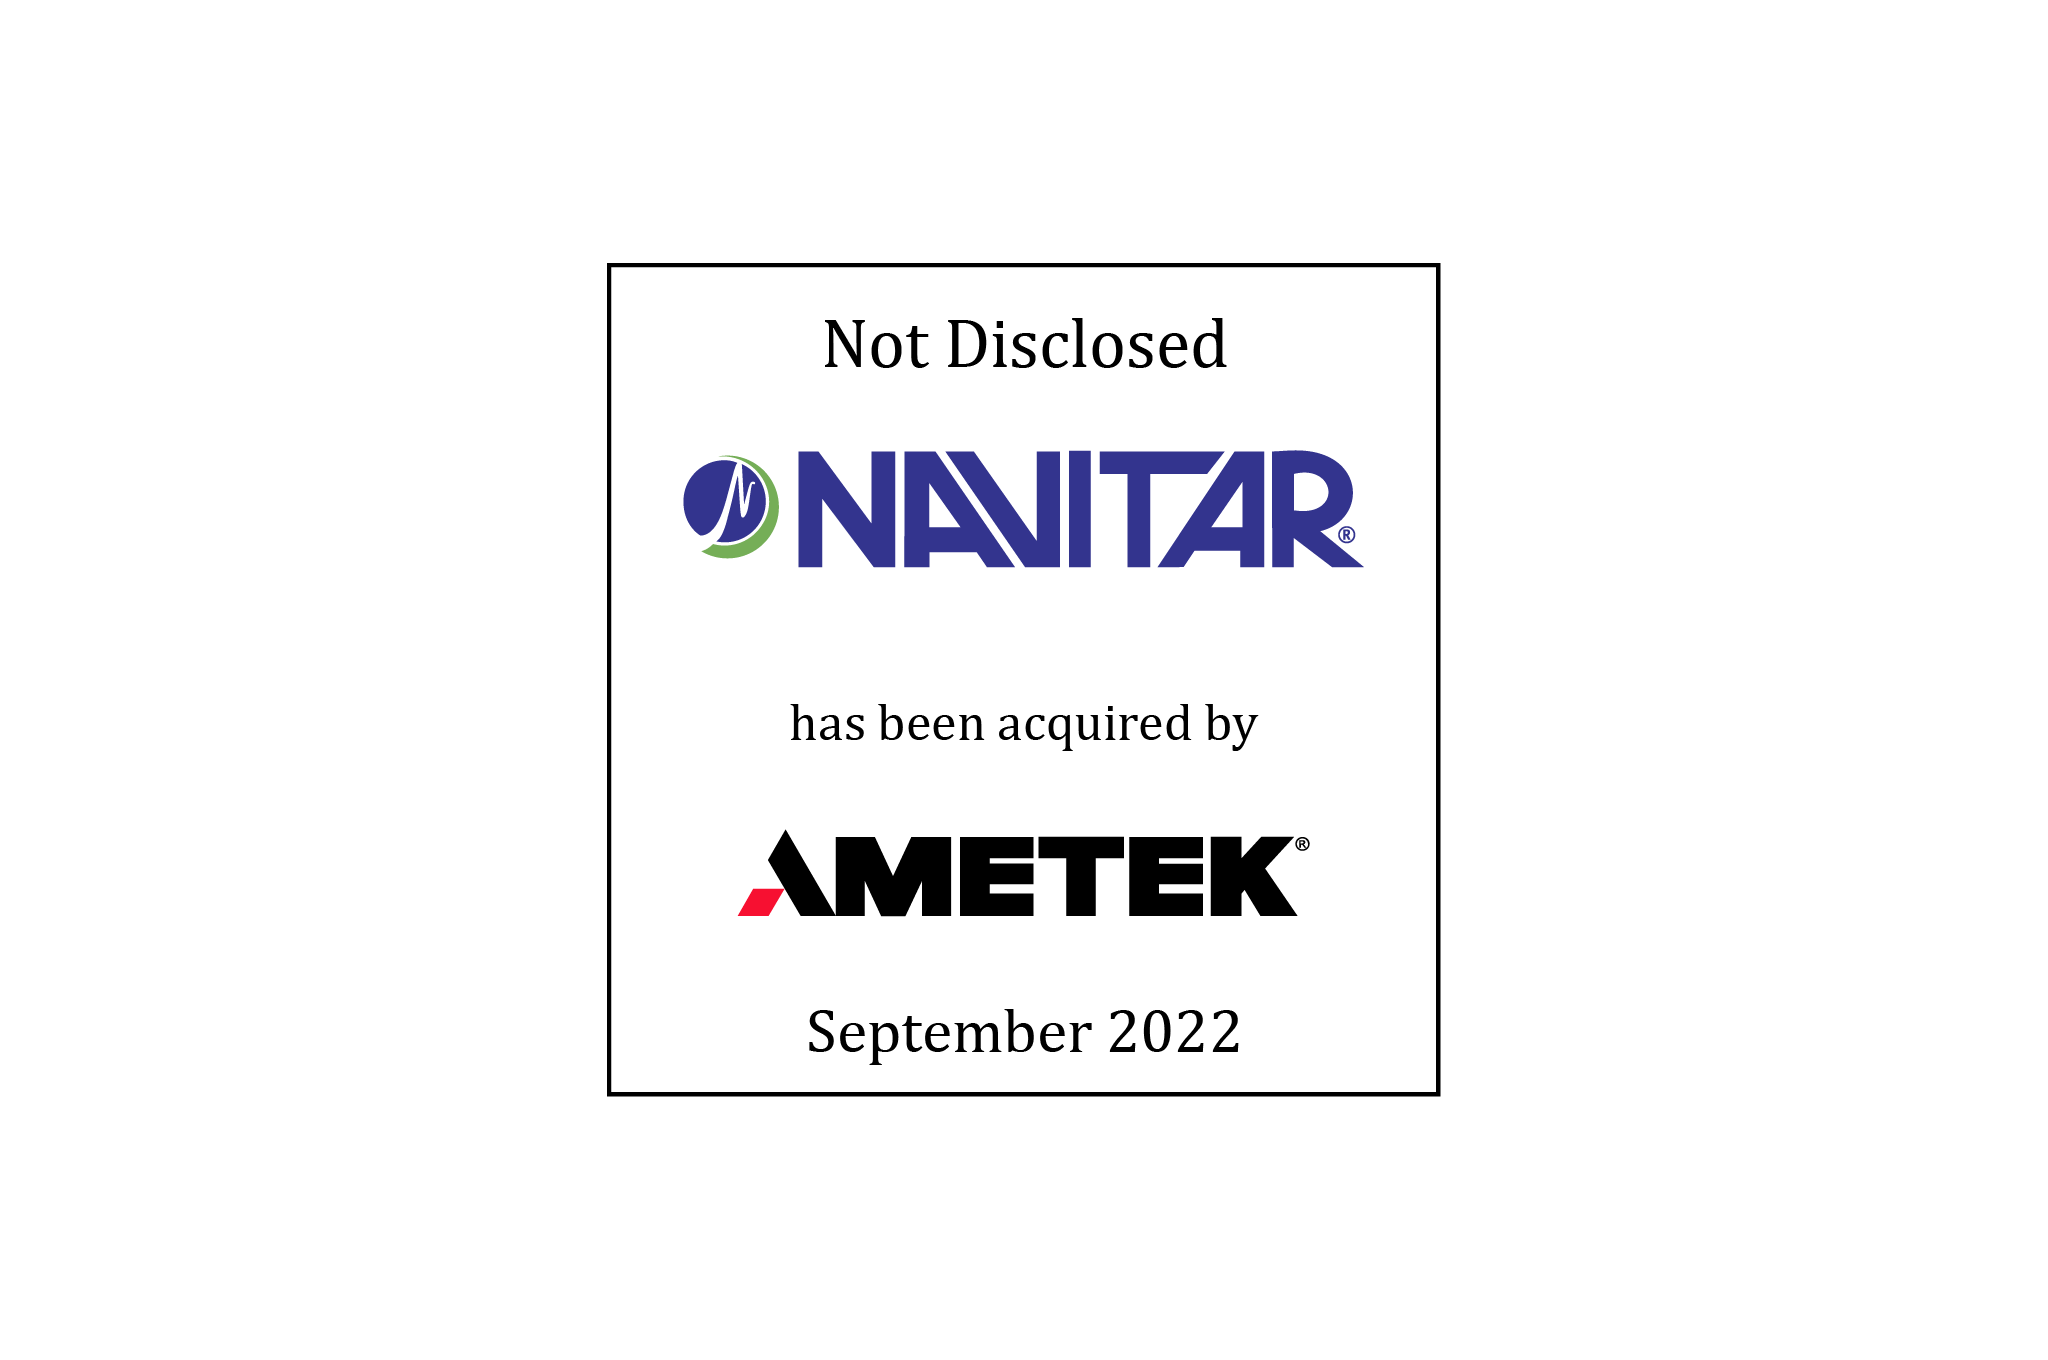 Not Disclosed | Navitar (logo) has been acquired by Ametek (logo) | September 2022